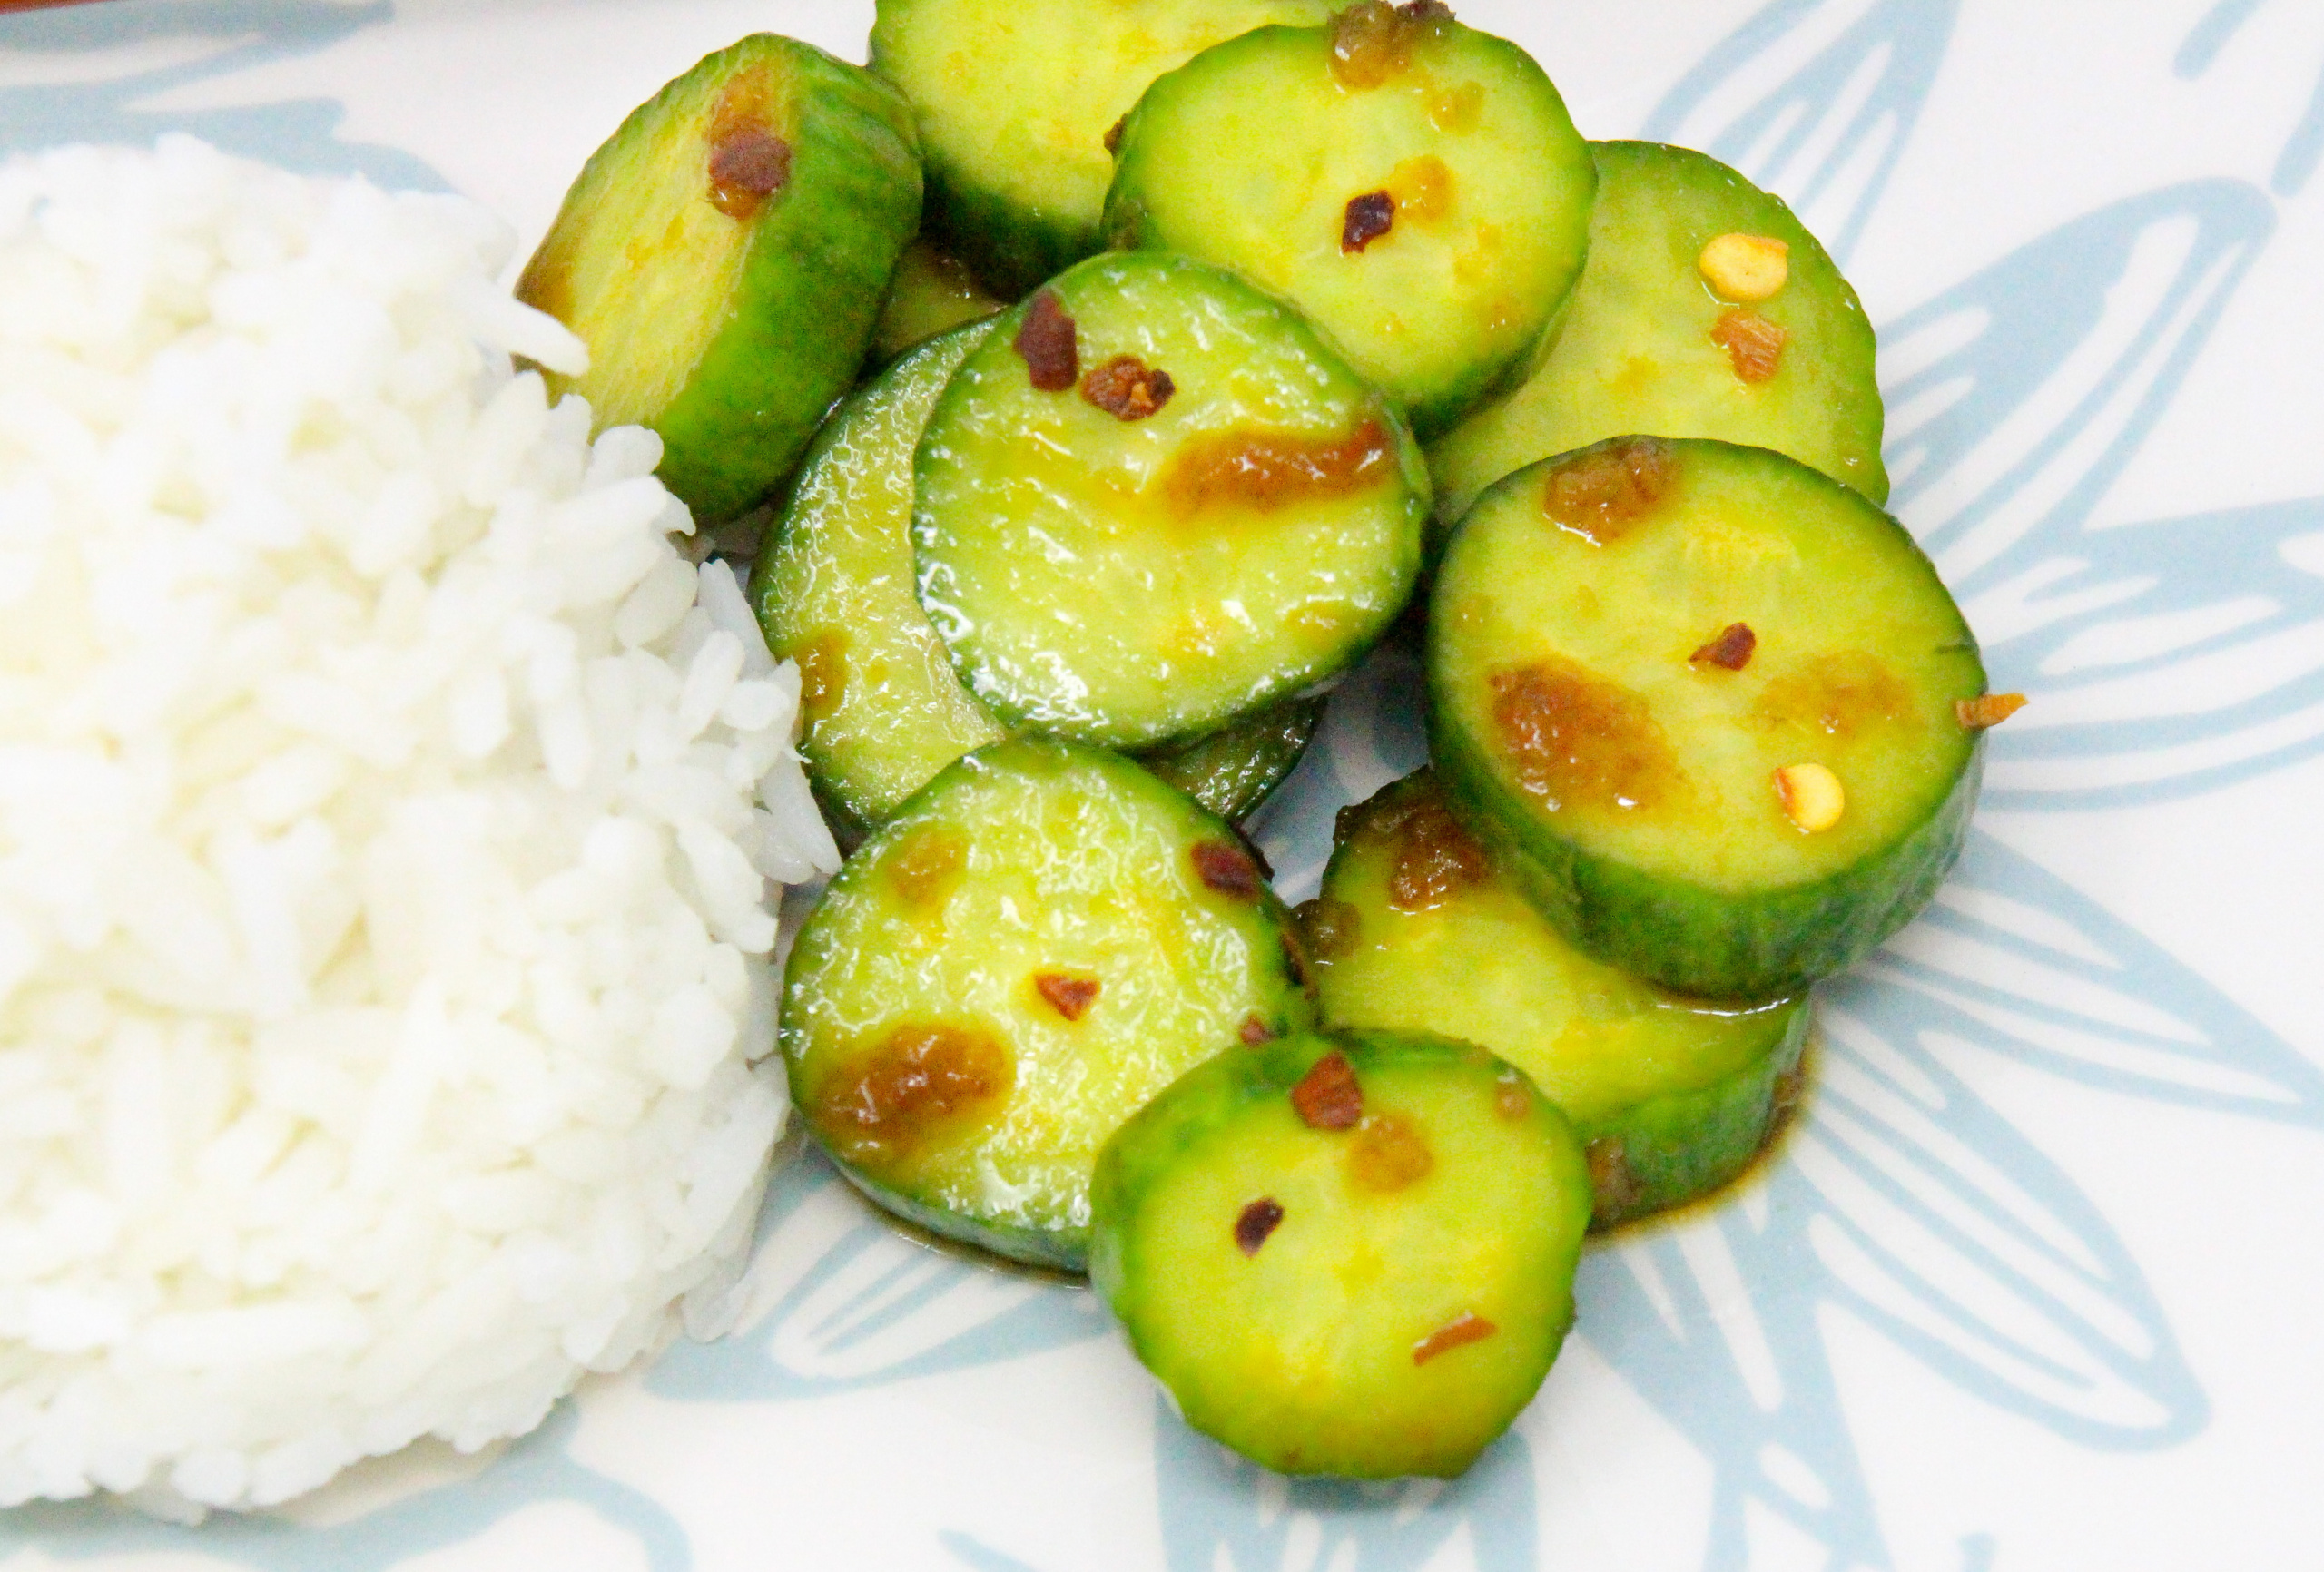 Tangy and a touch of heat, Spicy Cucumber Salad makes a great accompaniment to any roasted or sautéed meat entrée or whenever you want a refreshing way to showcase your bountiful garden harvest of cucumbers. Recipe shared with permission granted by Jennifer J. Chow, author of DEATH BY BUBBLE TEA. 